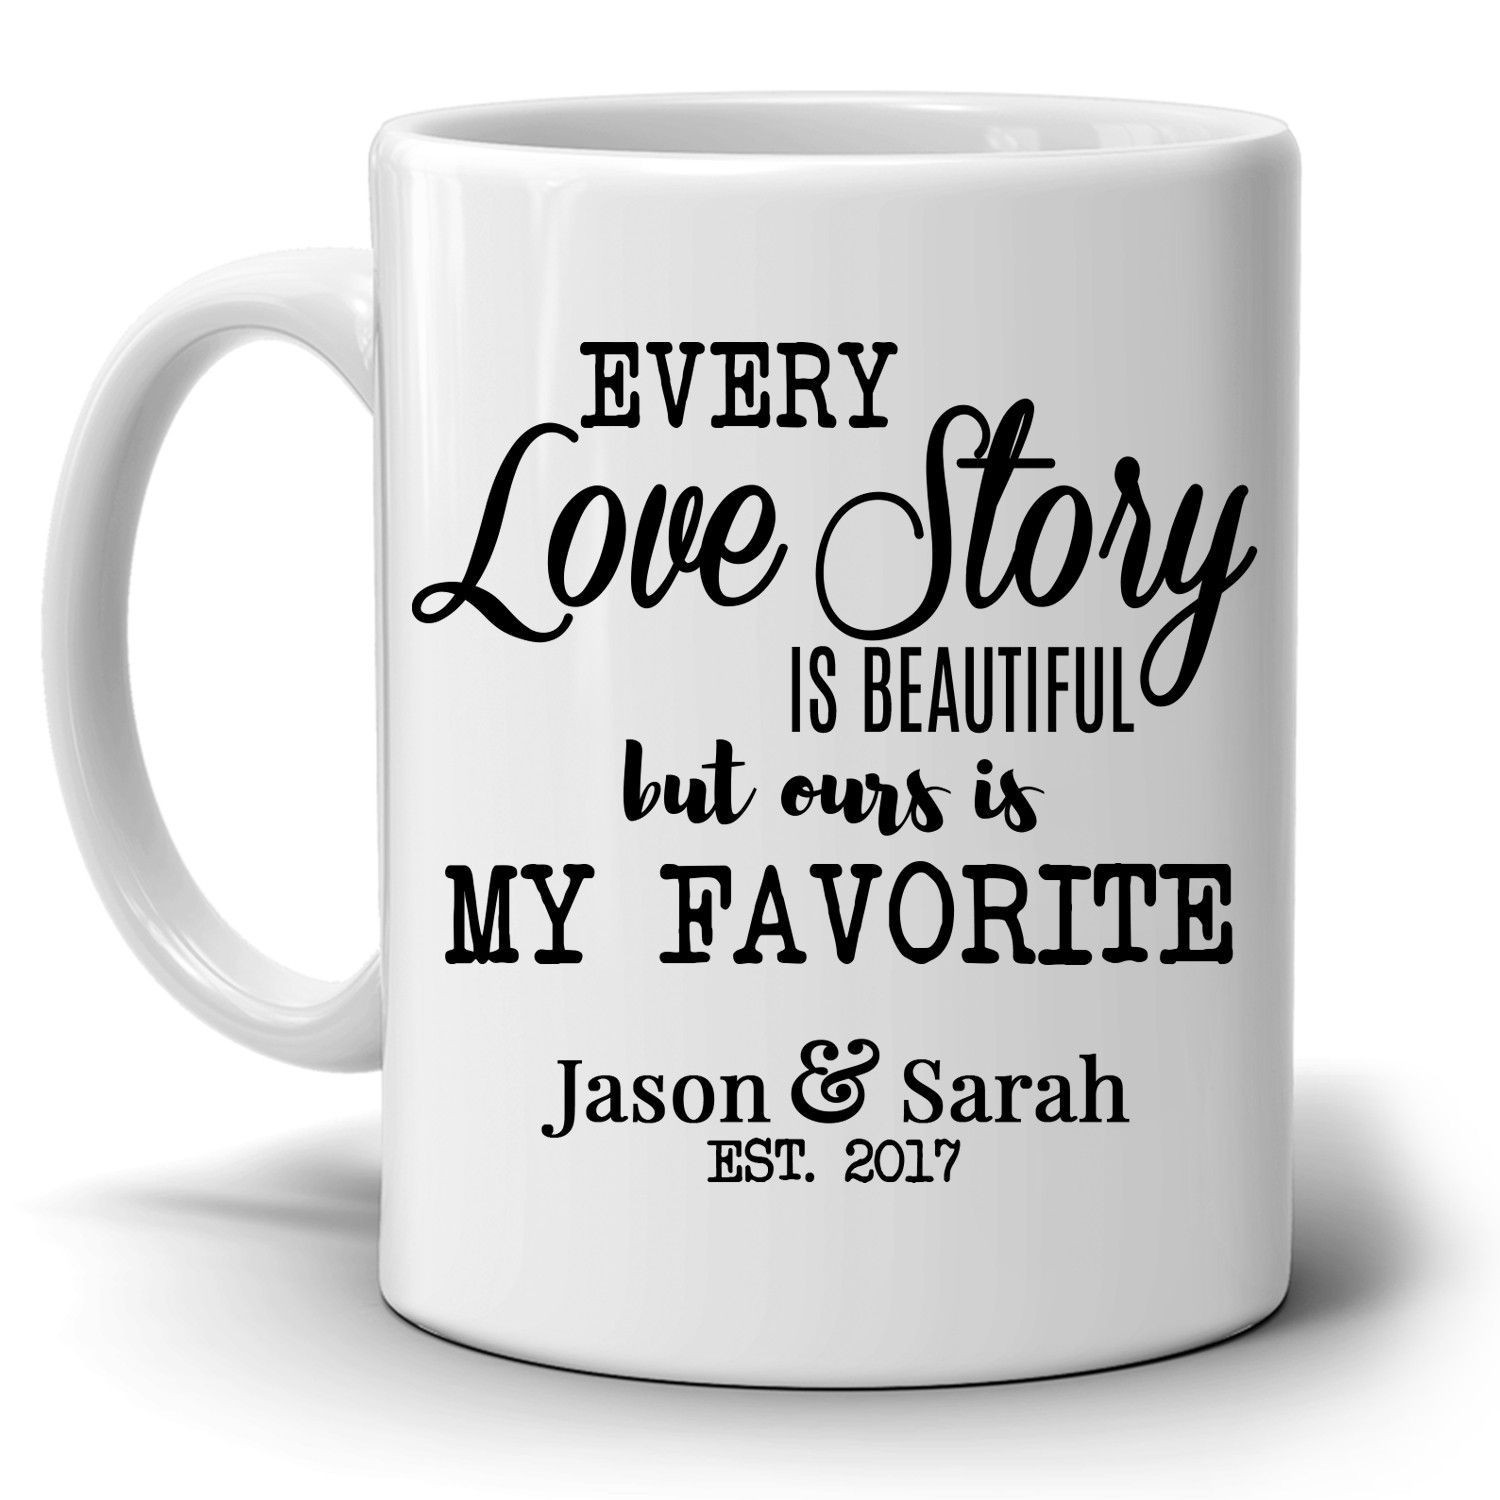 Personal Valentines Gift Ideas
 Personalized Romantic Couples Names Gift Coffee Mug for